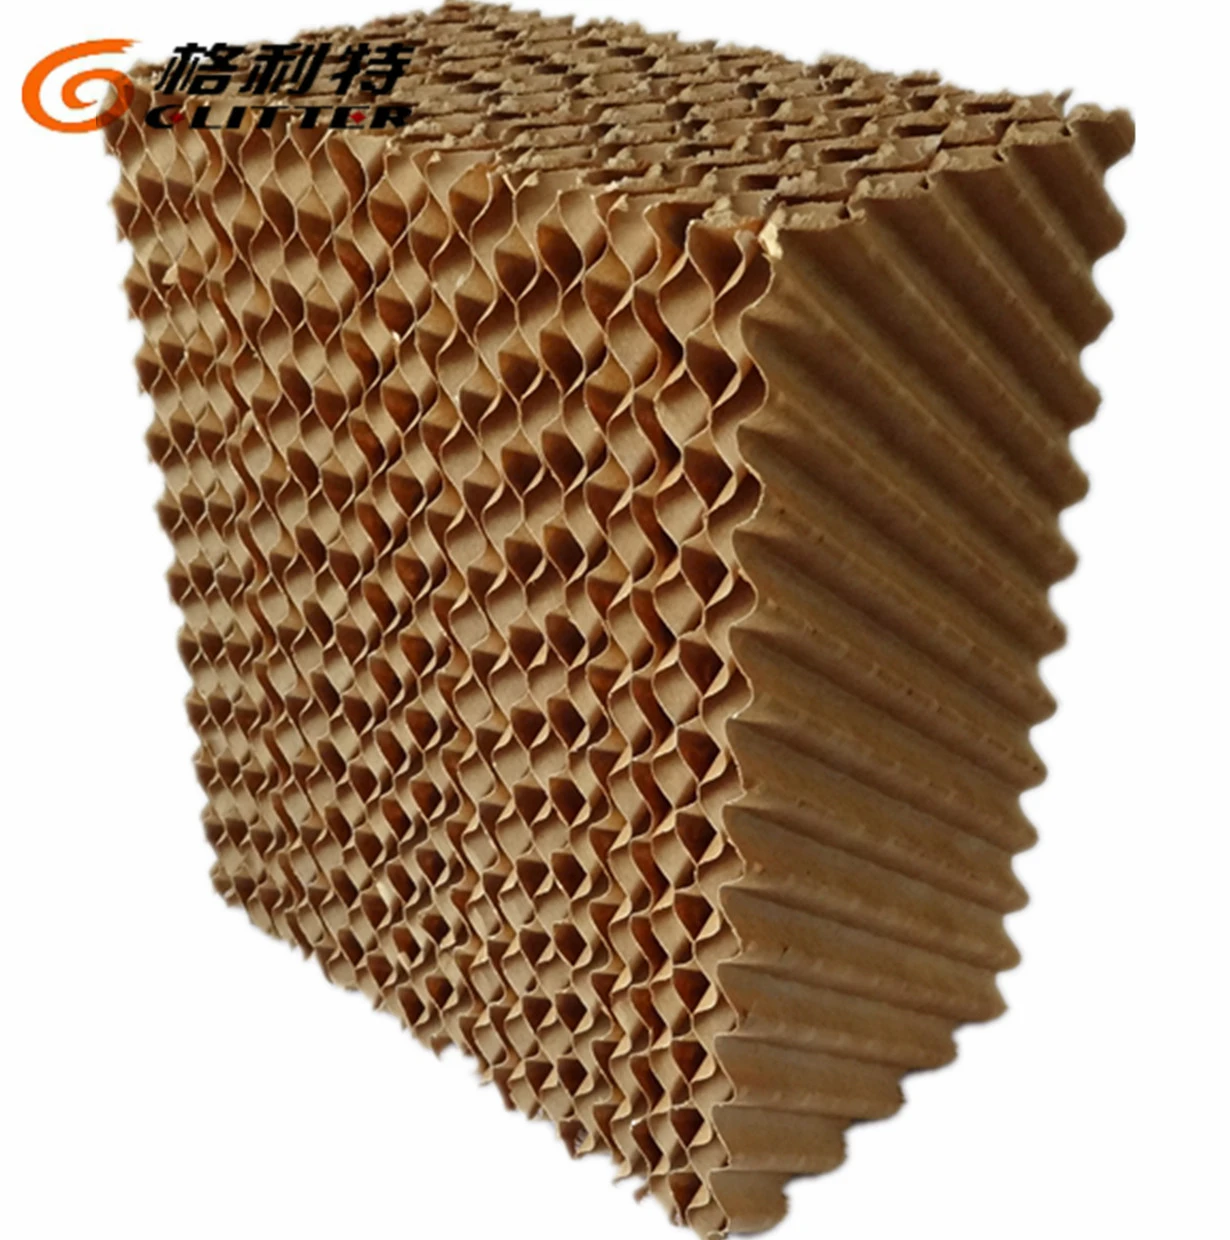 Poultry farm brown paper evaporative cooling pad for evaporative air cooler/animal husbandry/poultry farm/greenhouse